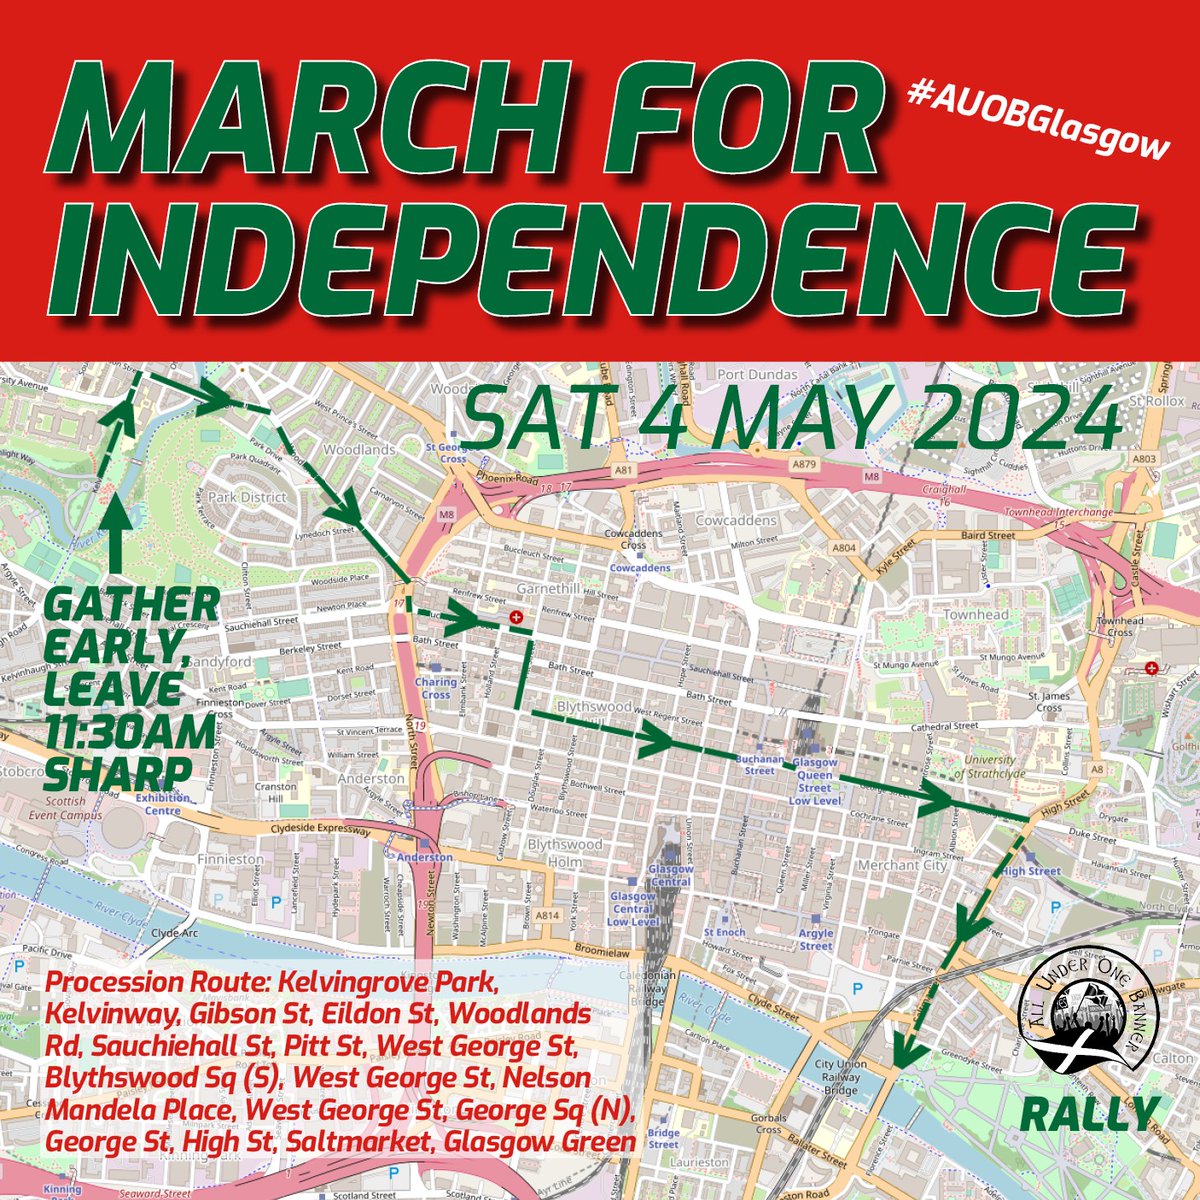 MARCH FOR INDEPENDENCE 🏴󠁧󠁢󠁳󠁣󠁴󠁿 GLASGOW - SATURDAY 4 MAY #AUOBGlasgow